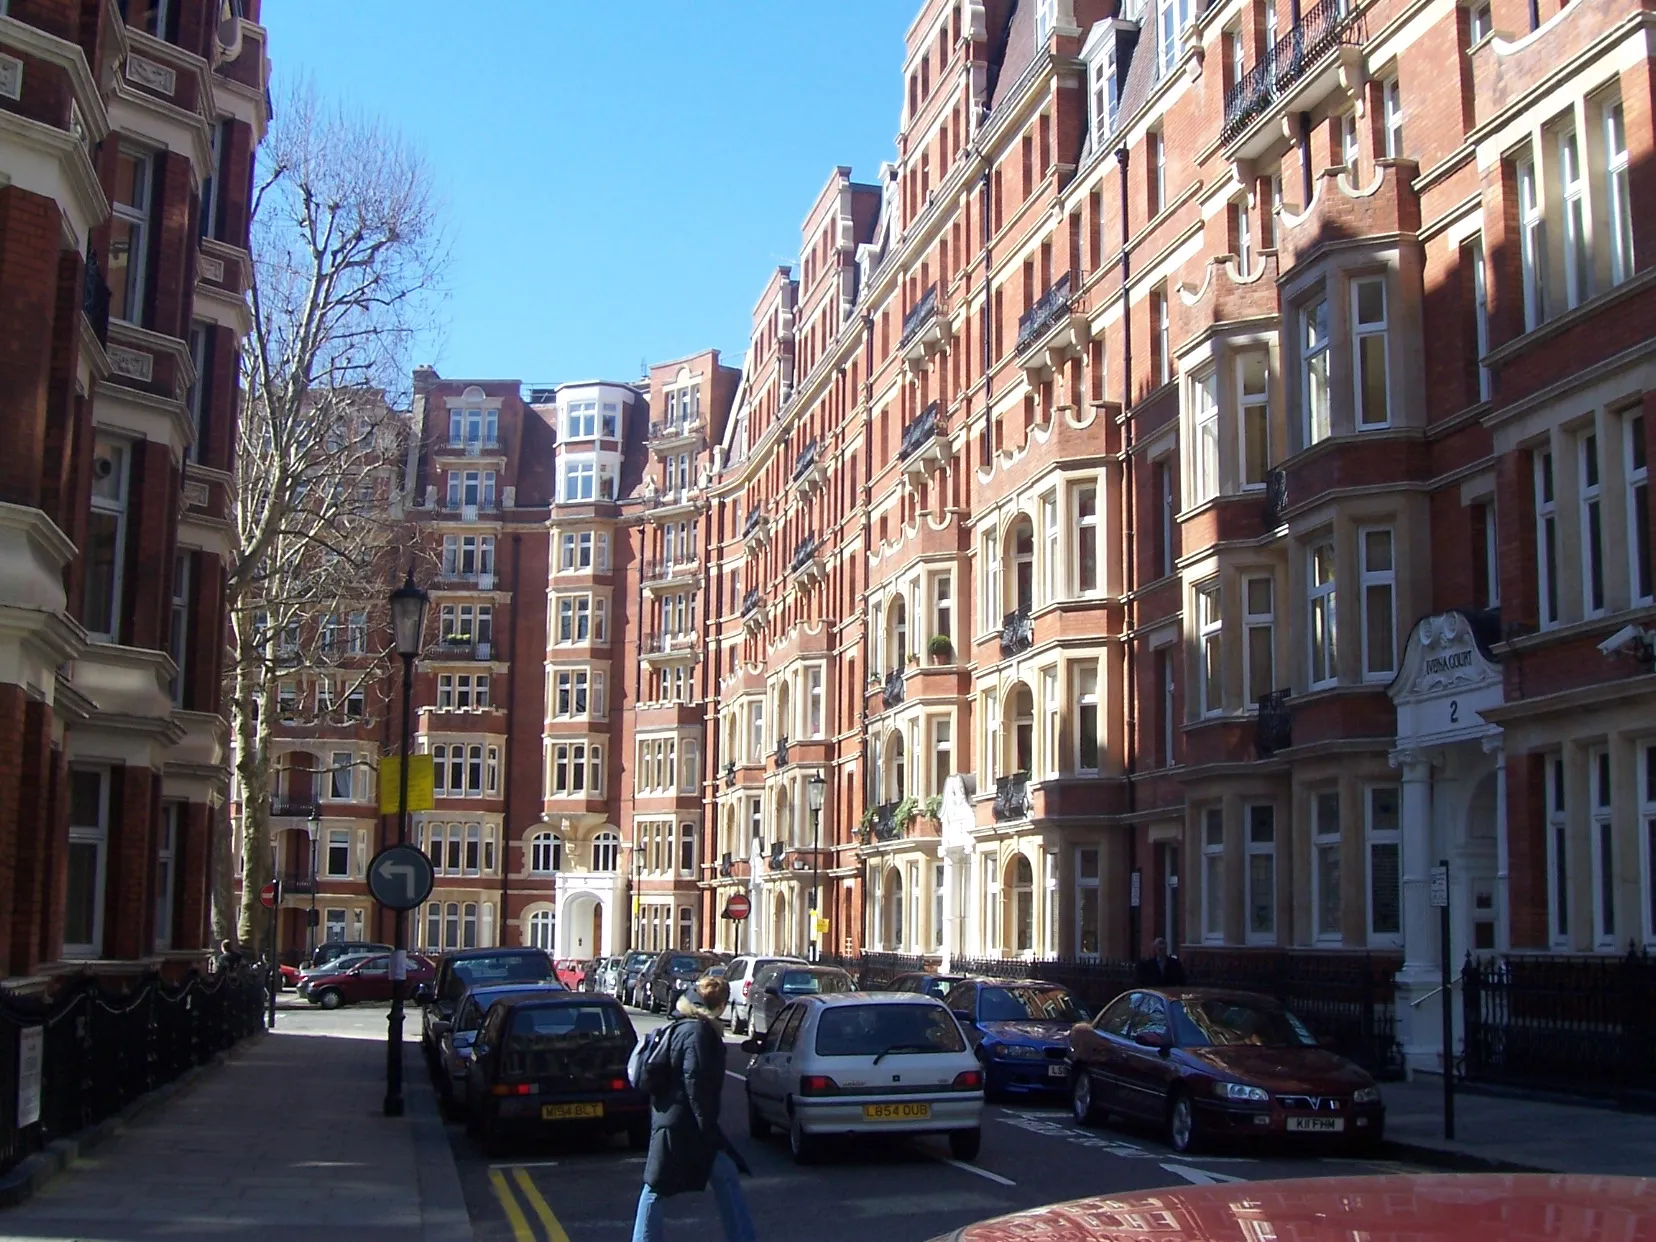 Photo showing: A wealthy area in Kensington, that is just south of Kensington High Street. (Original: This is a picture of some picturesque buildings in the area of Kensington, London, UK. This street is just south of Kensington High Street.)